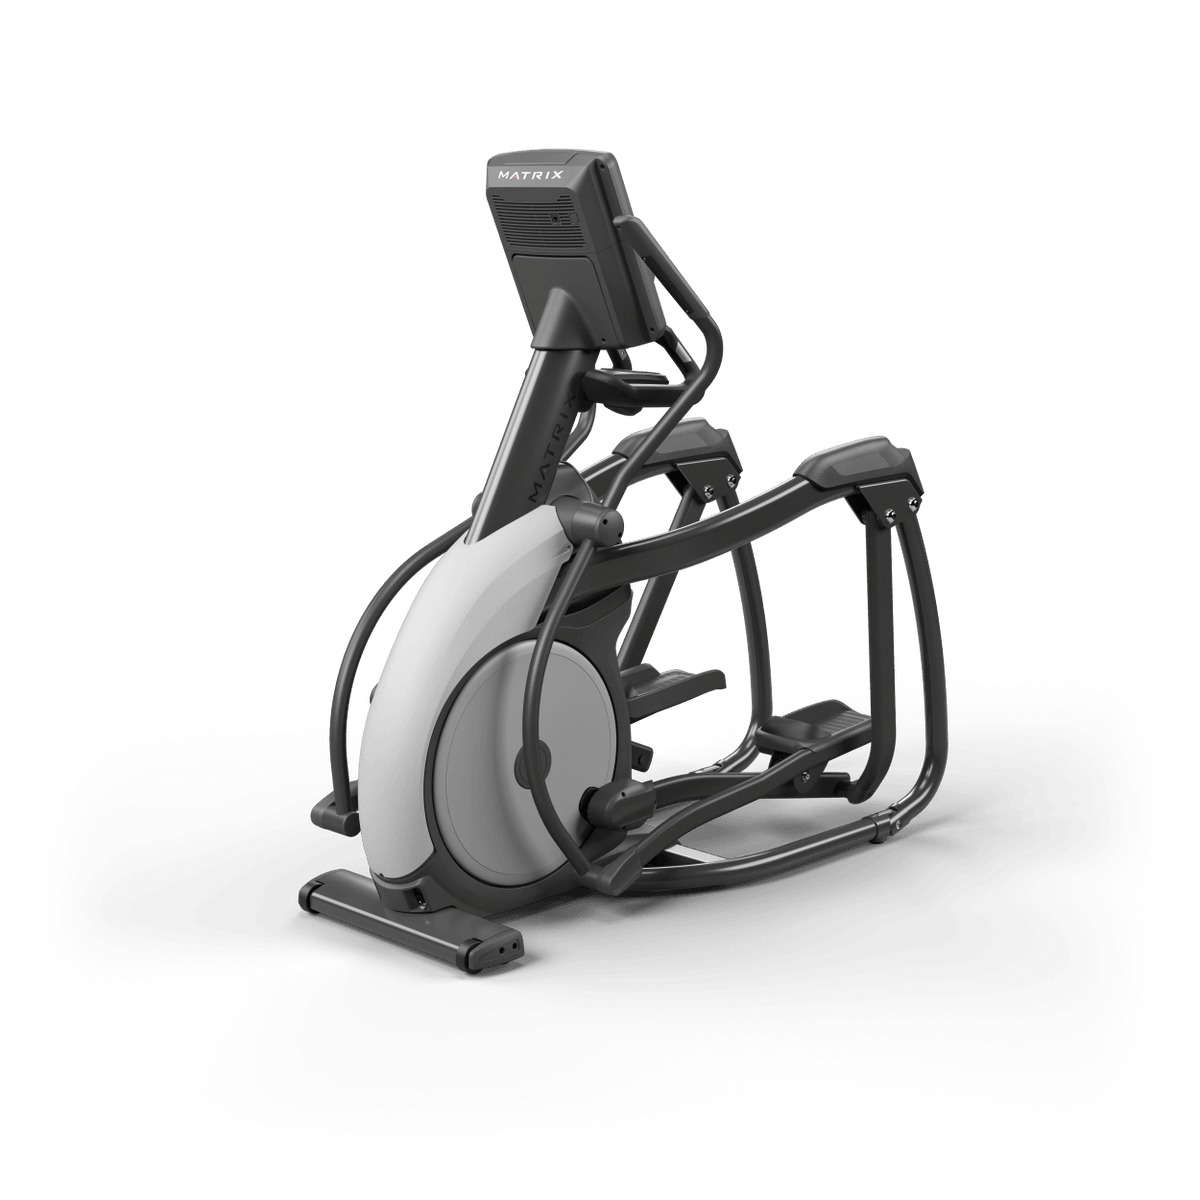 Matrix Fitness Performance Elliptical with Premium LED Console rear view | Fitness Experience